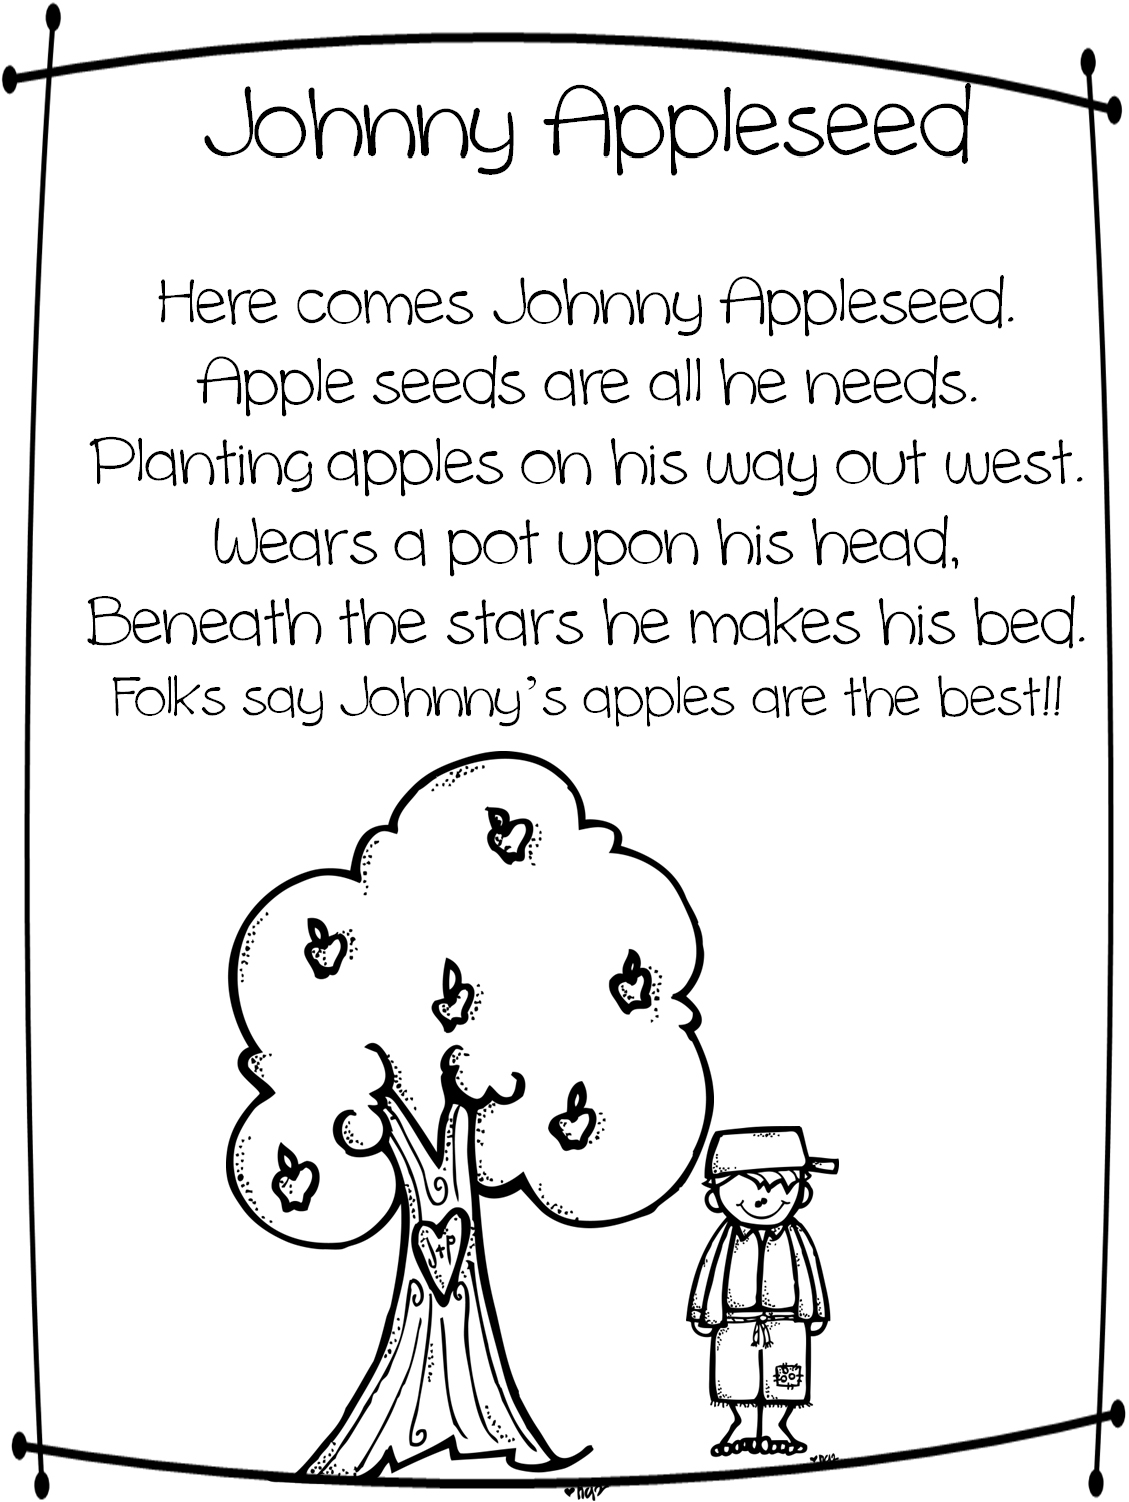 printable-johnny-appleseed-story-printable-word-searches